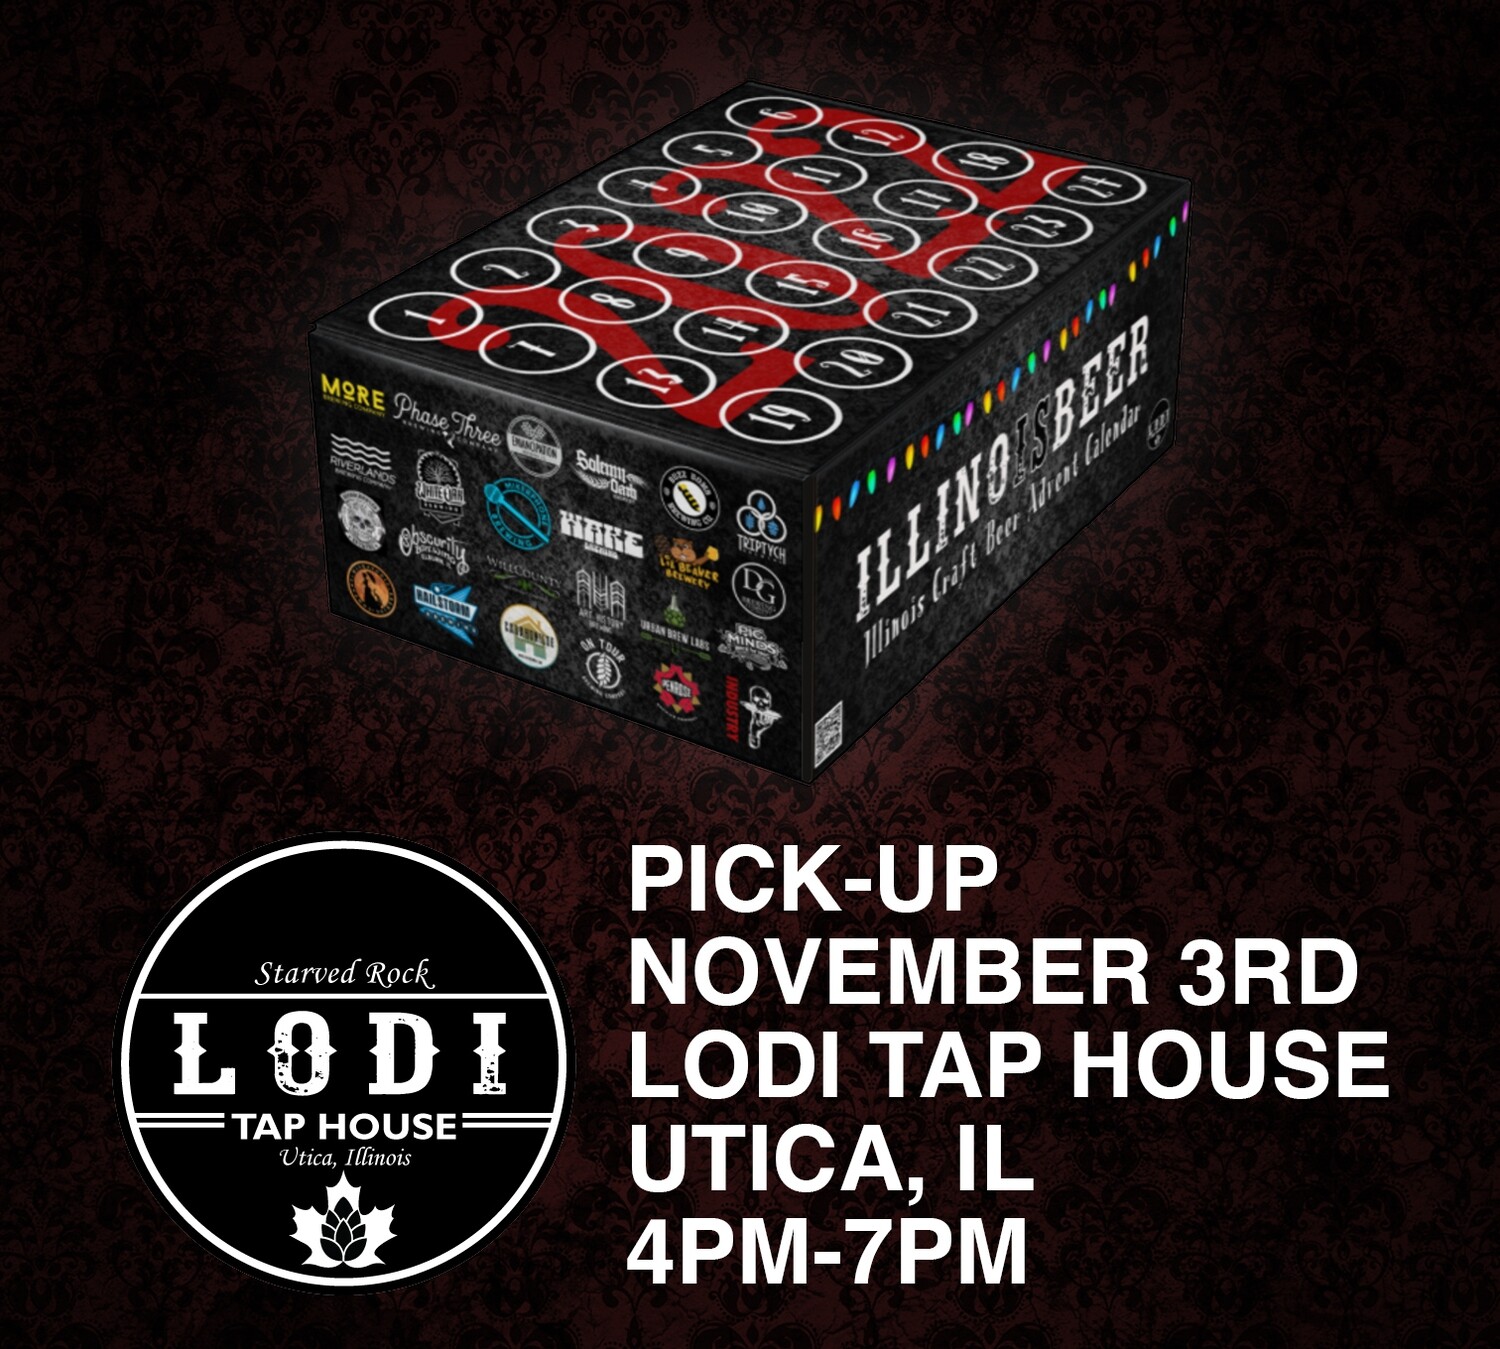 Pick Up 11/3 Utica IL (Lodi Tap House) 4PM to 7PM - ILLINOISBEER Craft Beer Advent Calendar